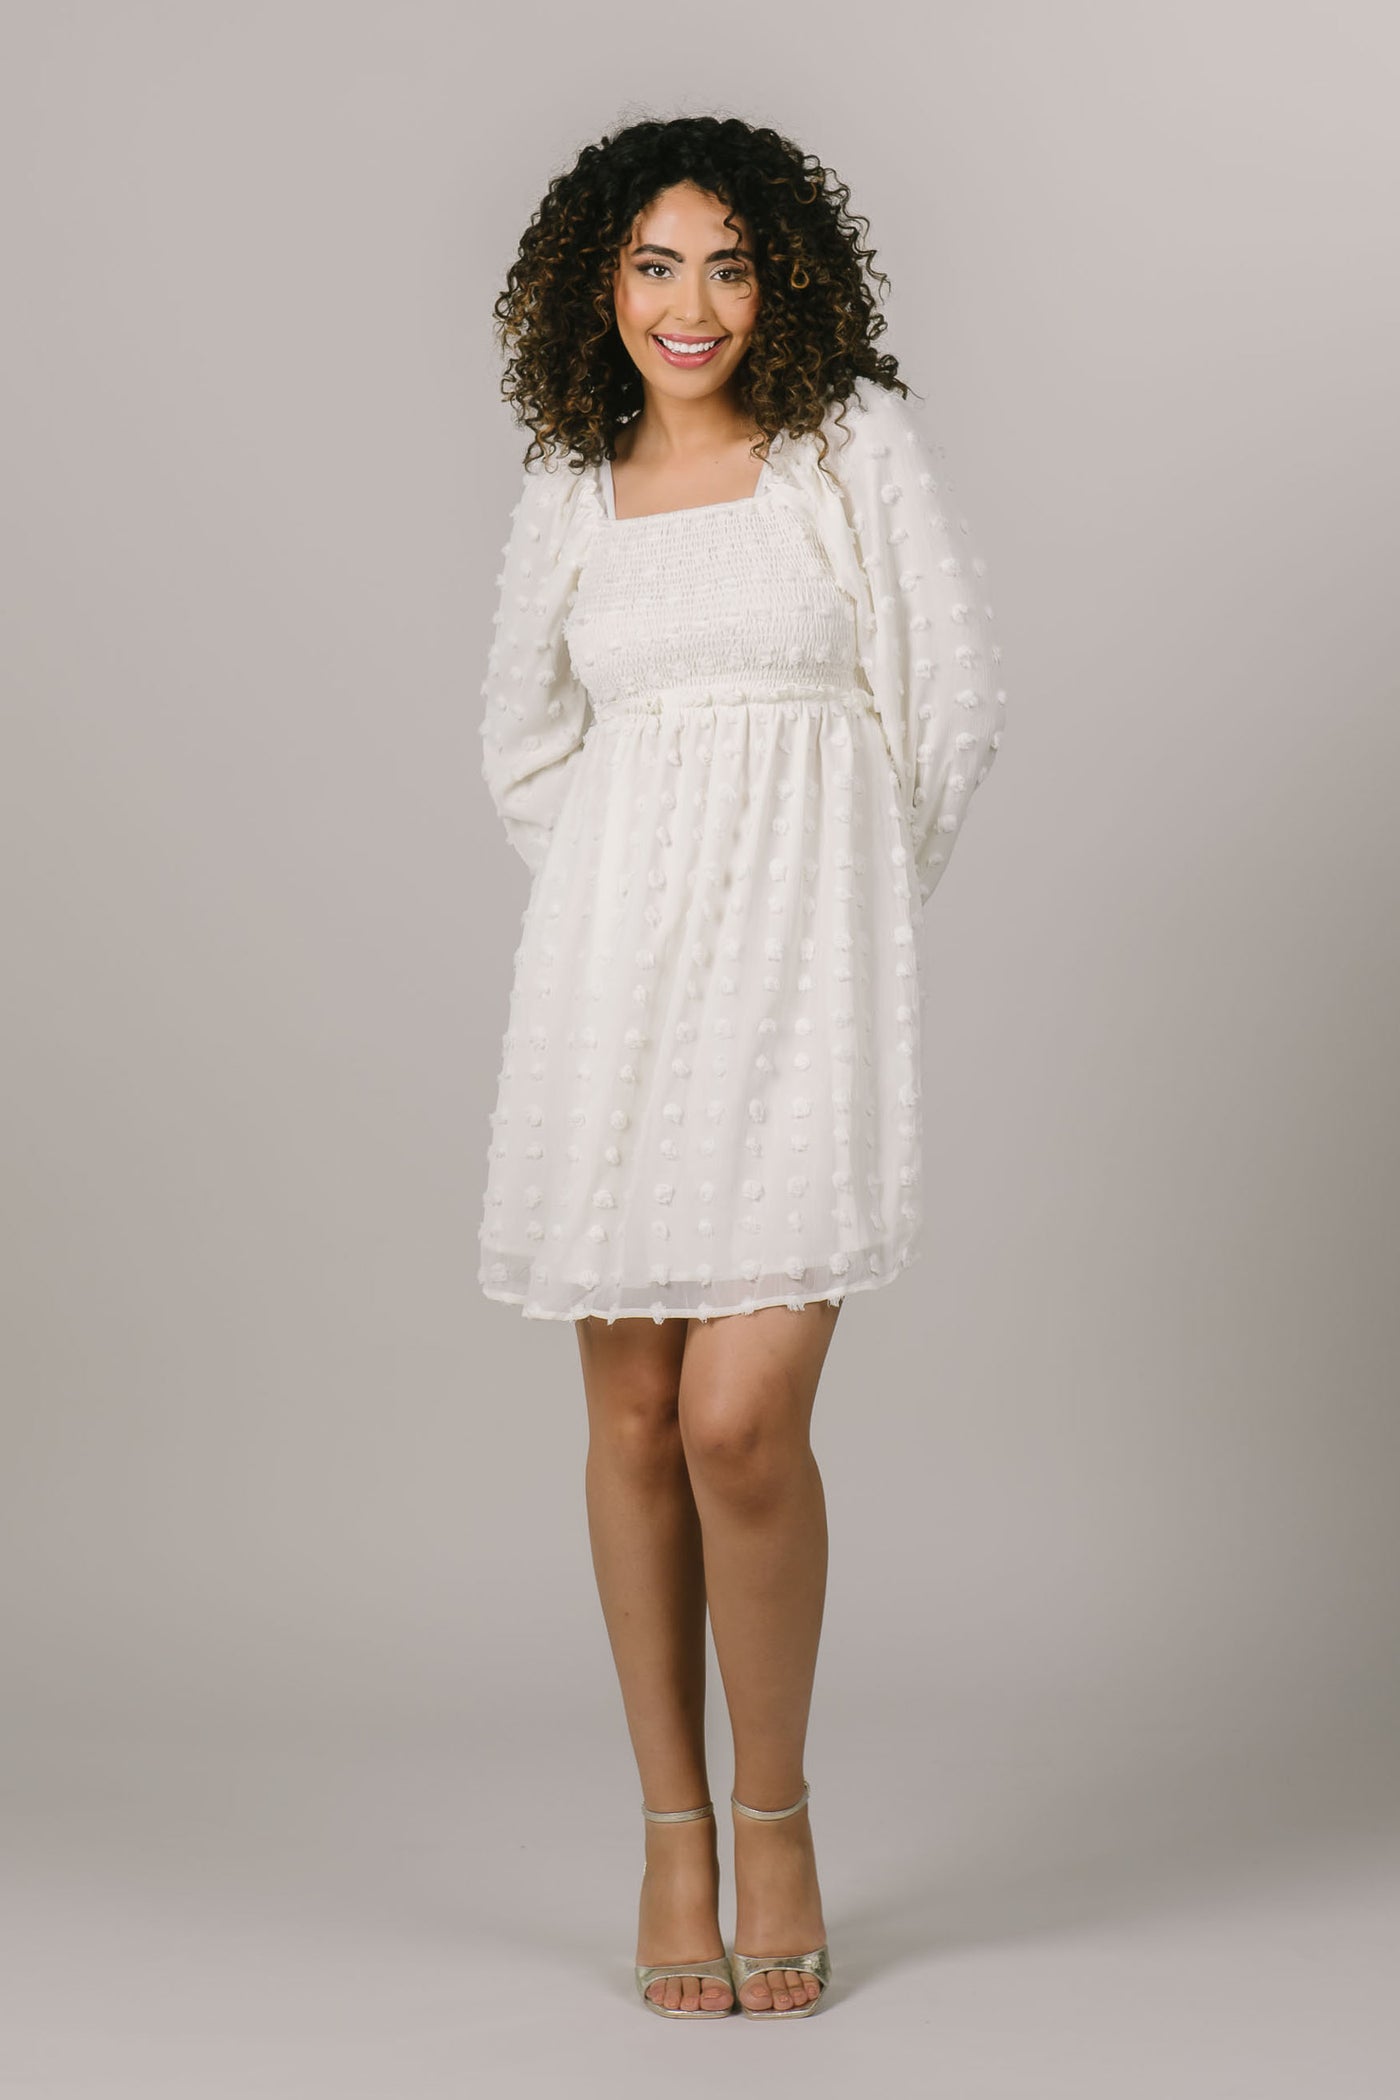 This is a modest dress with polka dot details and perfect as a white getaway dress for brides.